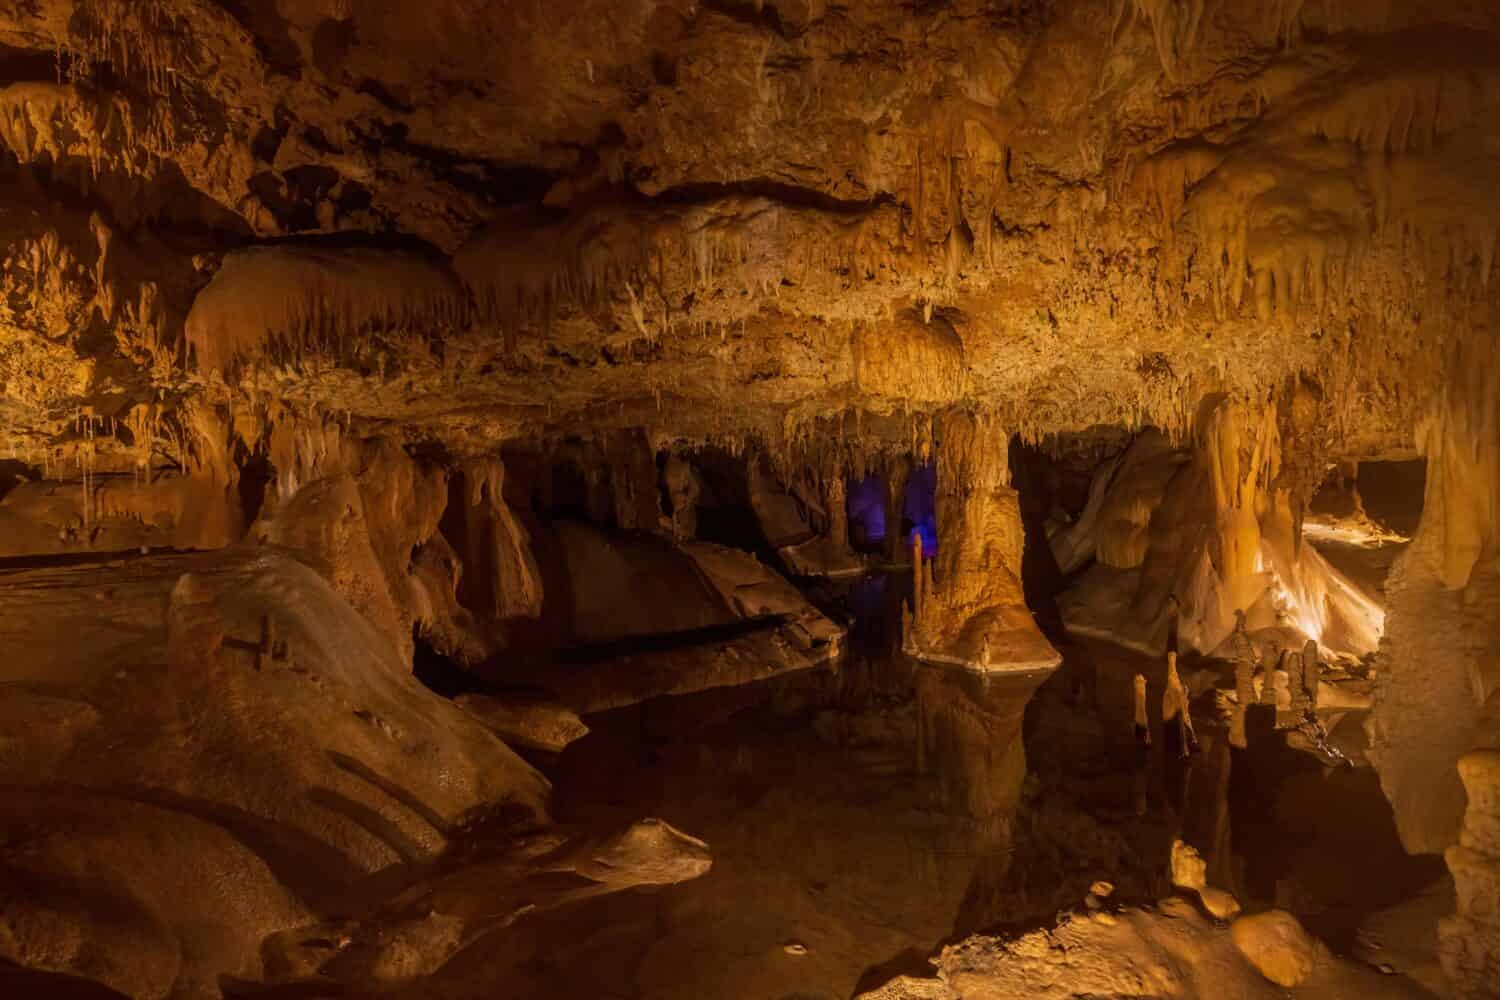 Interior view of the cave of Inner Space Cavern at Georgetown, Texas